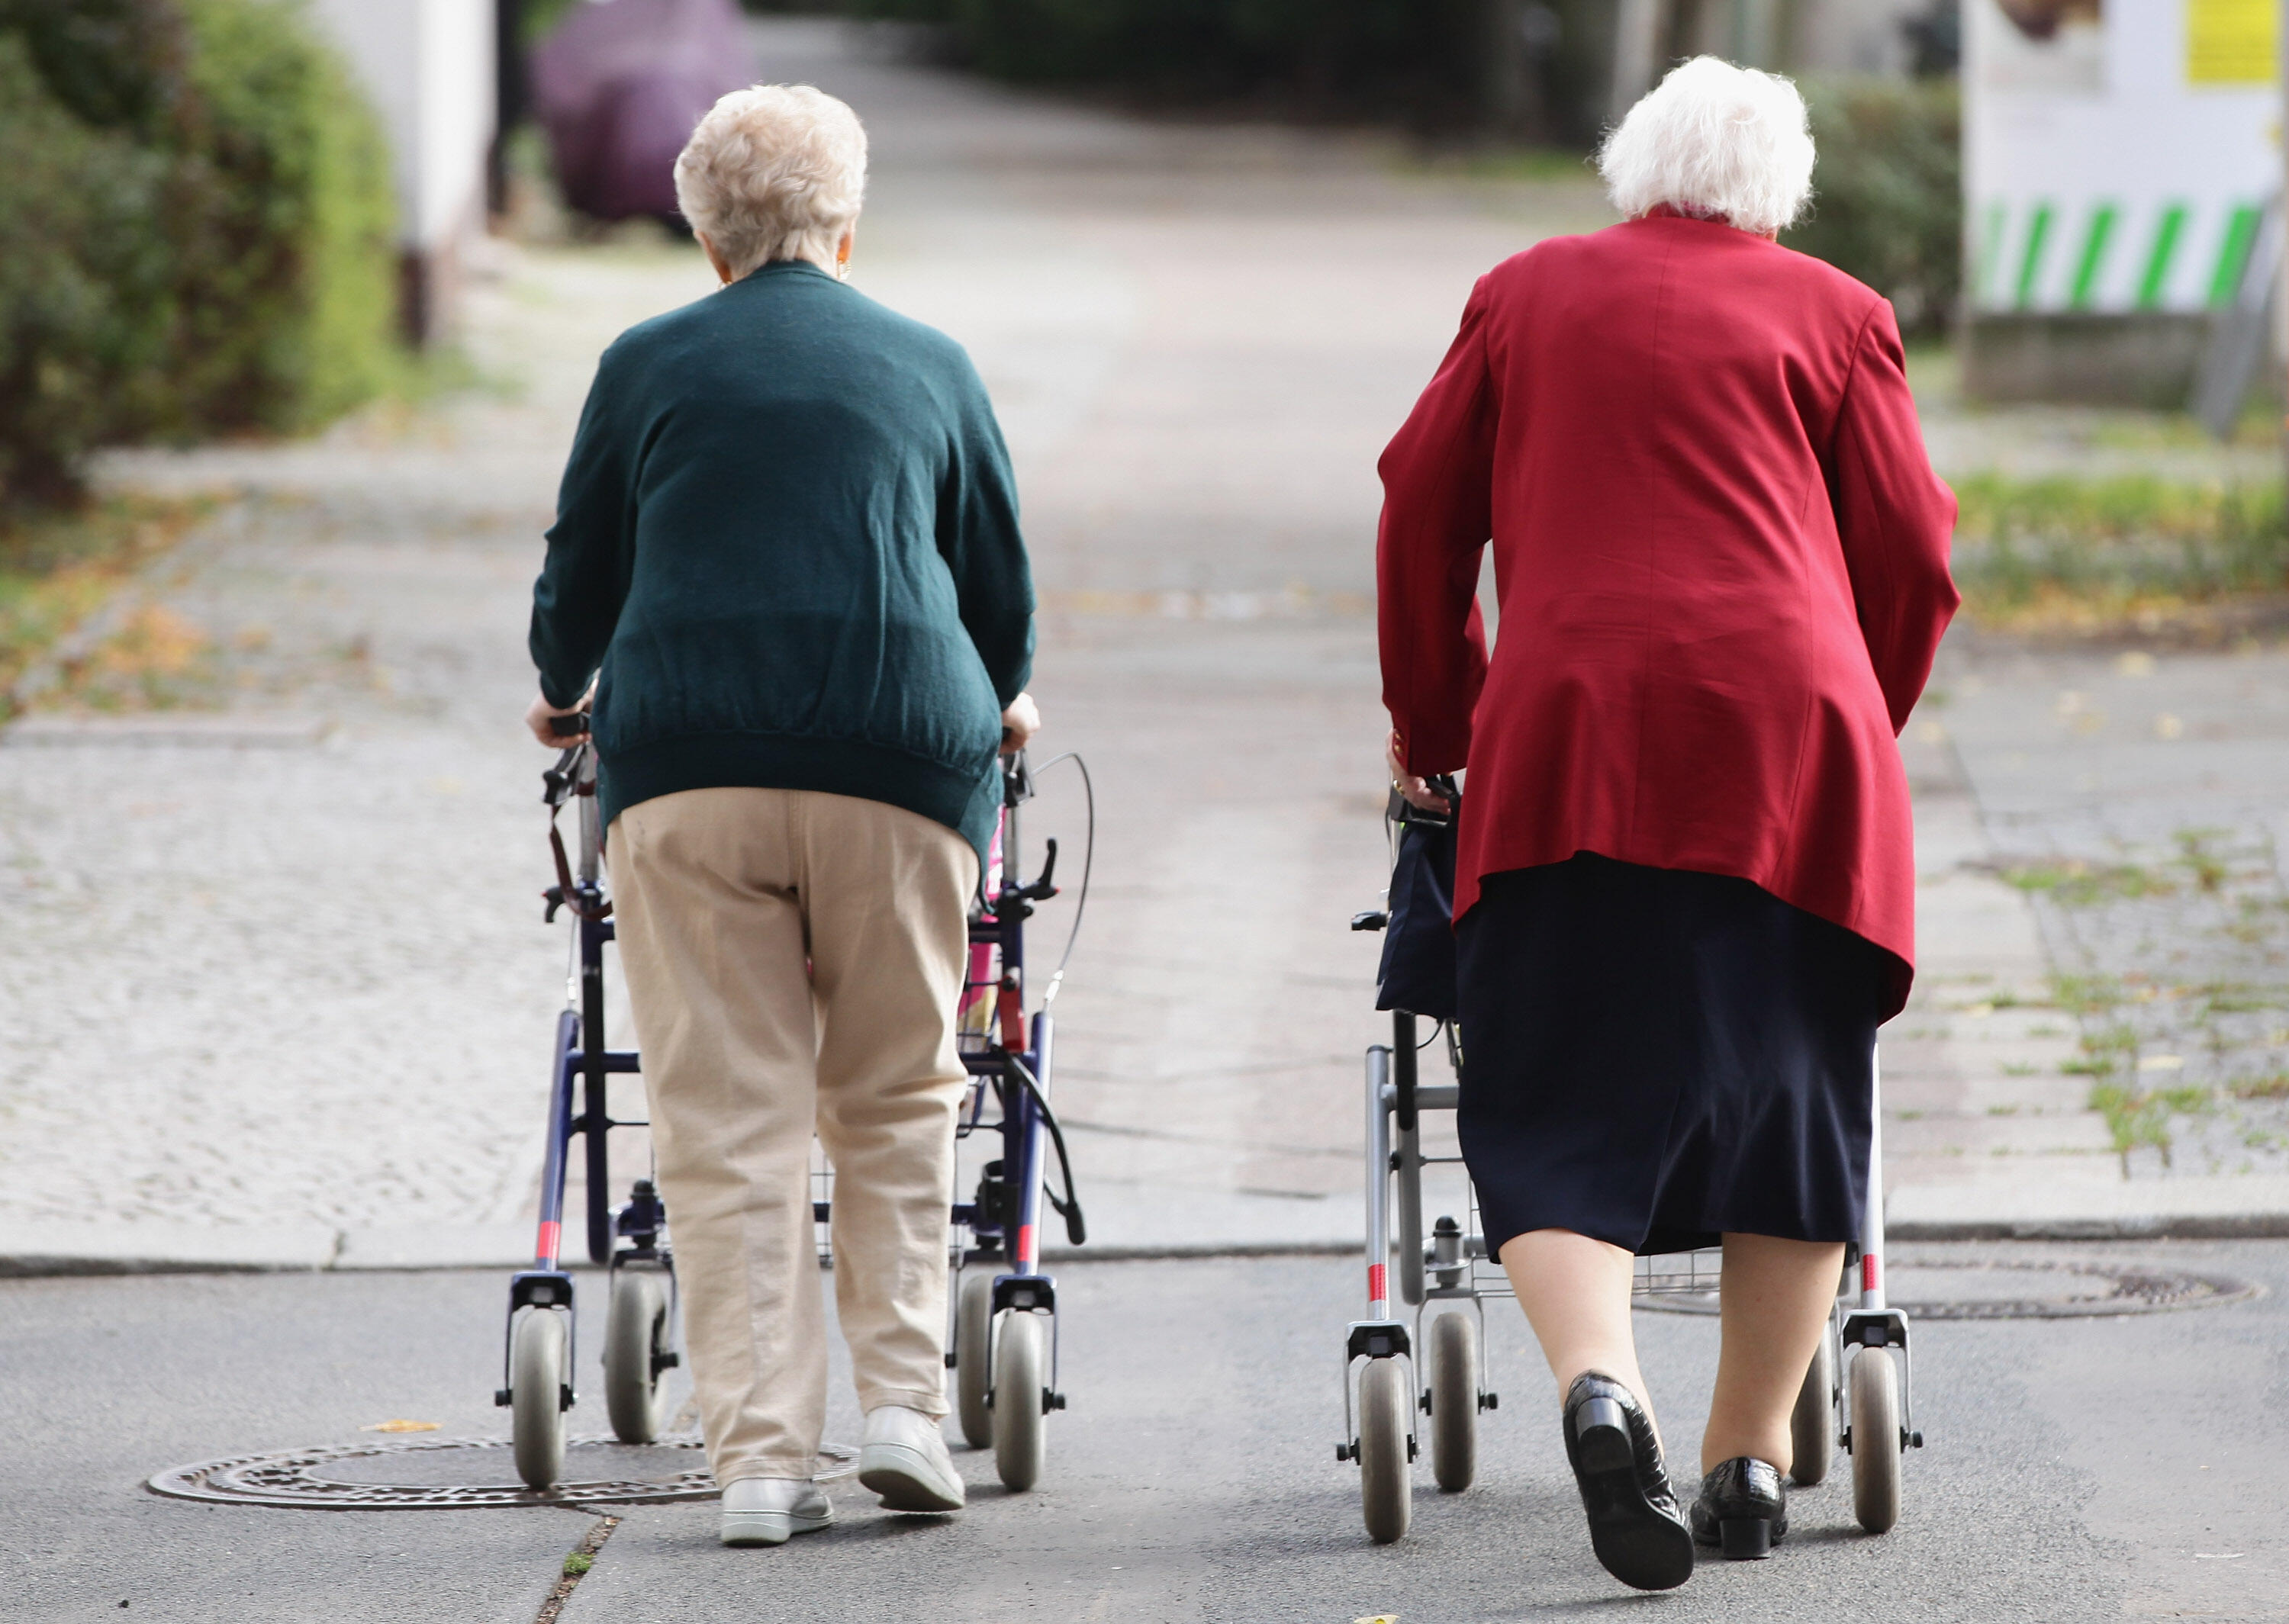 BERLIN - SEPTEMBER 10:  Two elderly women push shopping carts down a street on September 10, 2010 in Berlin, Germany. Germany's elderly population is growing and its overall population is shrinking. Demographers and economists argue that the German govern